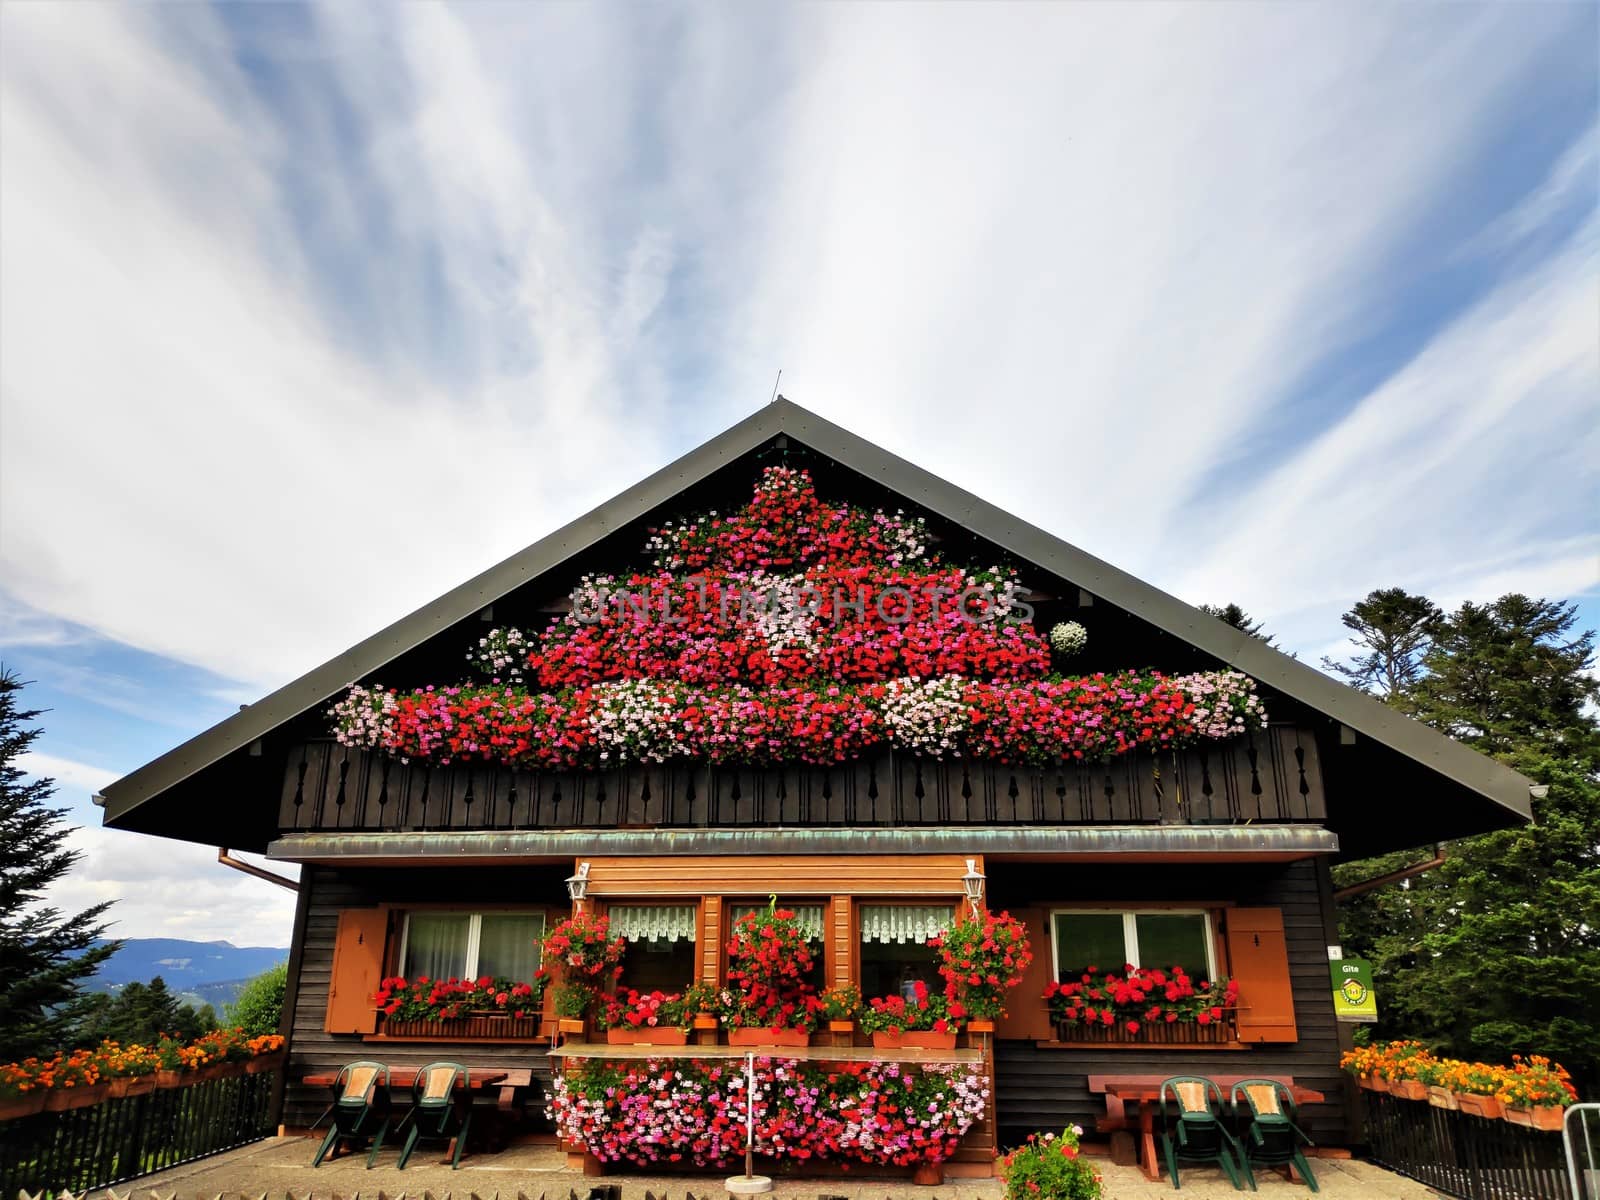 Wooden house with Geranium flowers and interesting cloud formation spotted in Sondernach near Schnepfenried, France